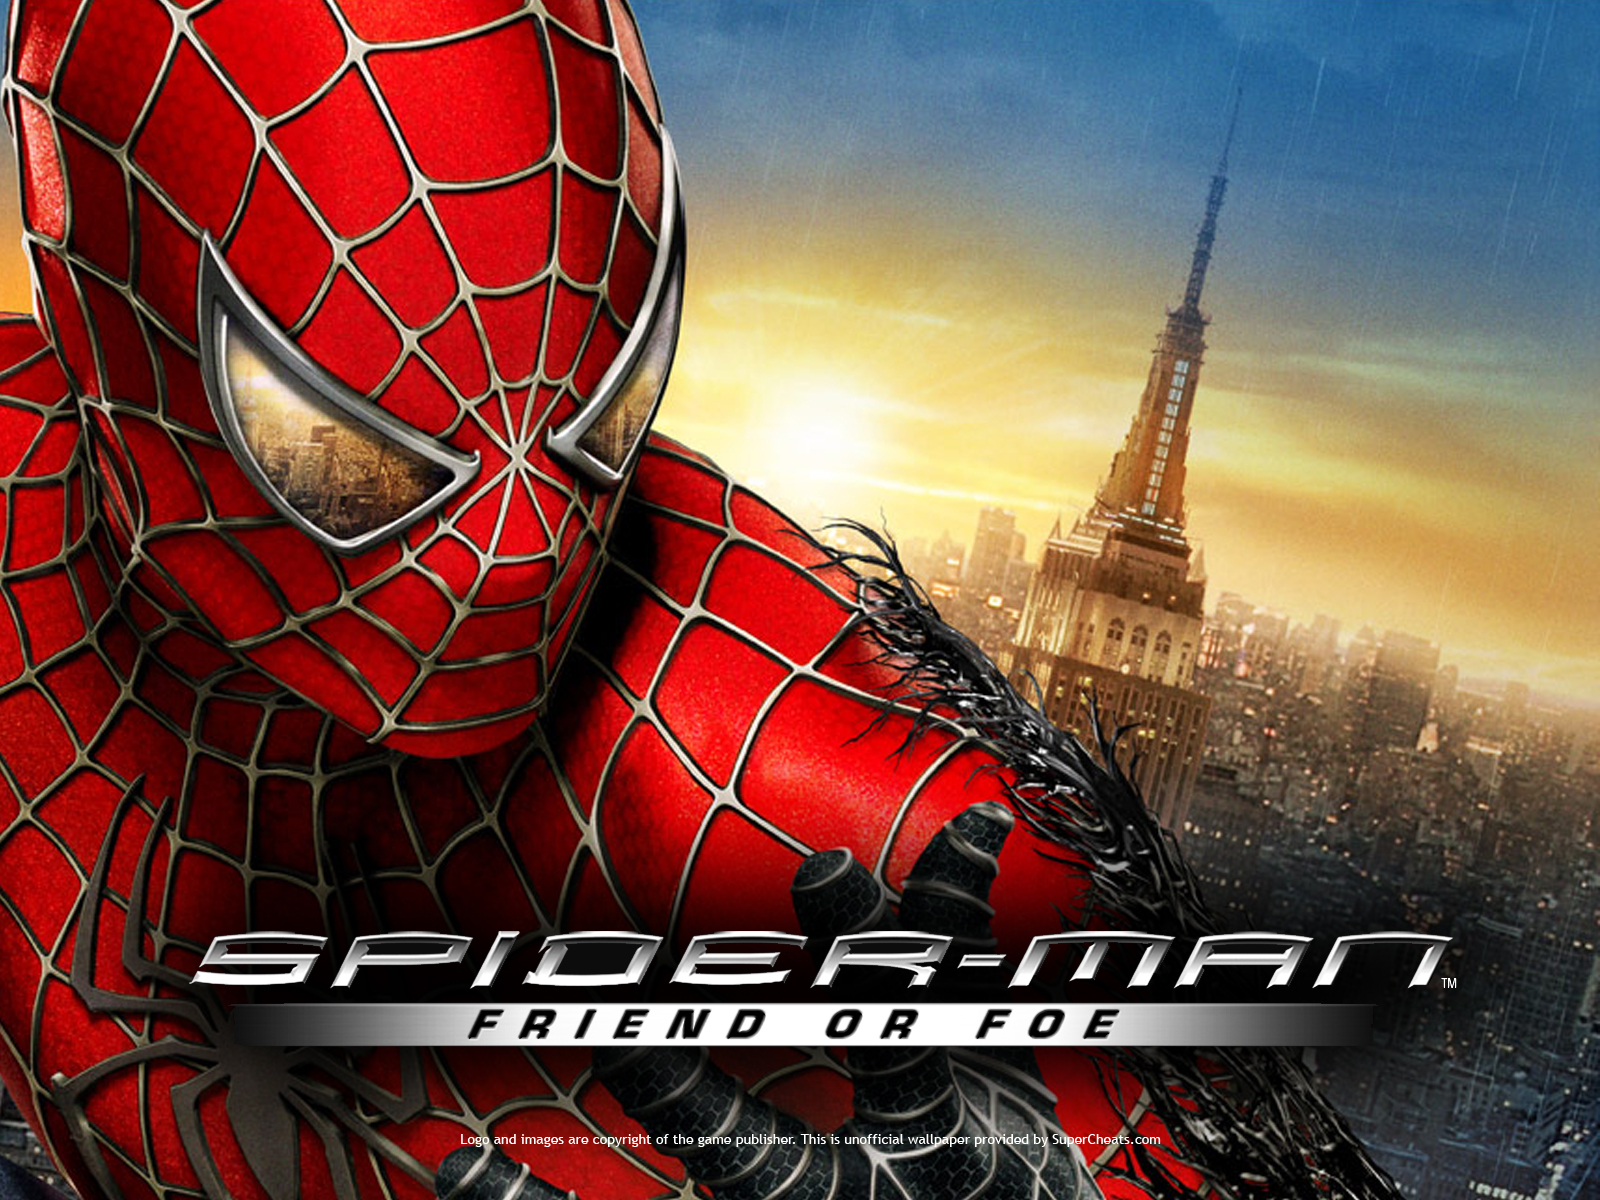 Download Spiderman Friend Or Foe Pc Game Highly Compressed